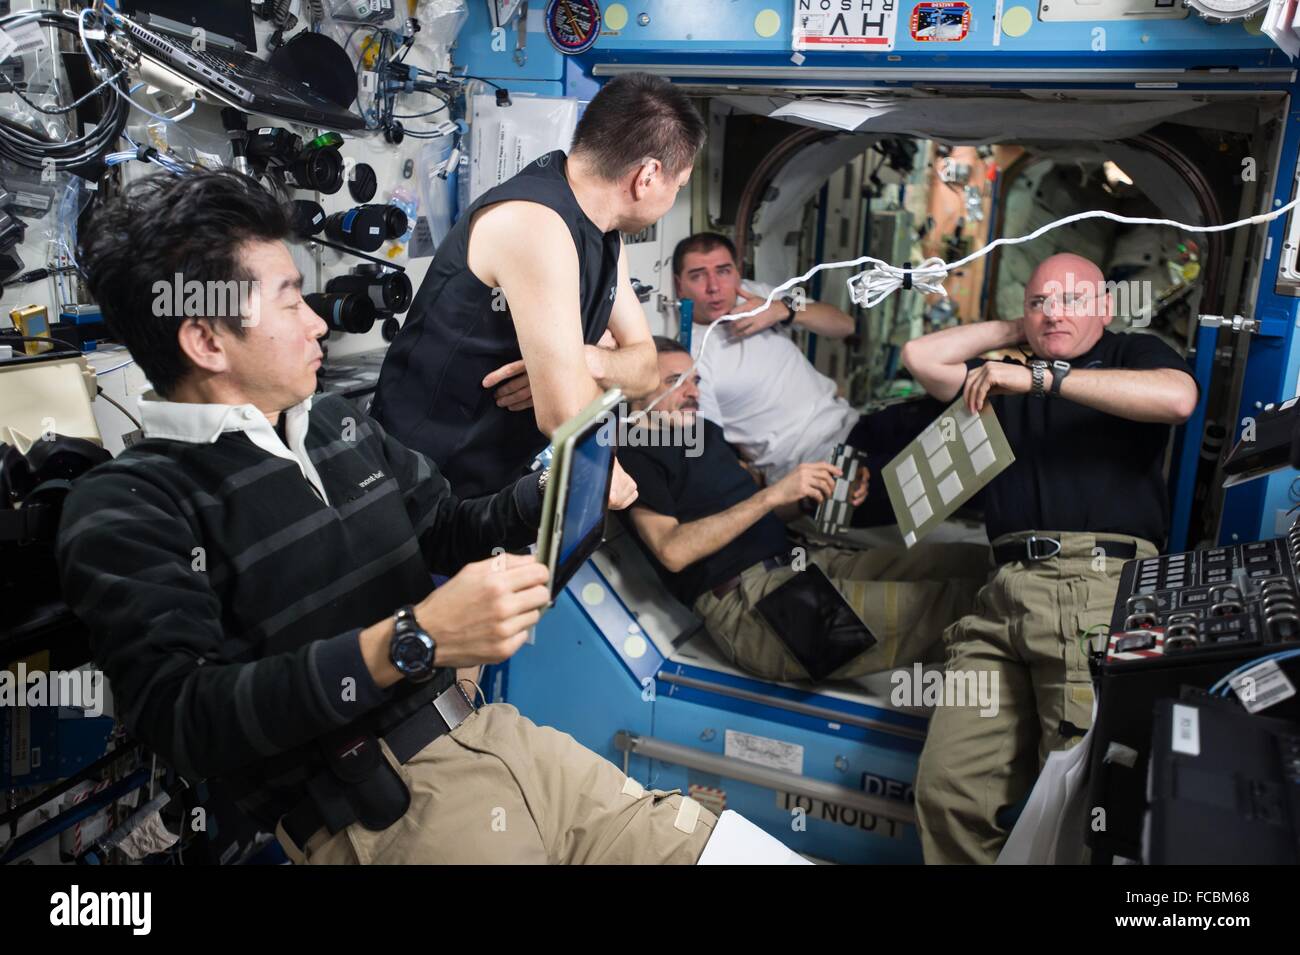 The Expedition 45 crew aboard the International Space Station gather for an emergency situation simulation inside the U.S. Destiny Laboratory October 19, 2015. Crews on the station routinely review and practice procedures that would be used in the event of an emergency. Pictured (left to right) is JAXA astronaut Kimiya Yui, Russian cosmonauts Oleg Kononenko, Mikhail Kornienko, and Sergey Volkov, and NASA astronaut and Expedition 45 commander Scott Kelly. Stock Photo